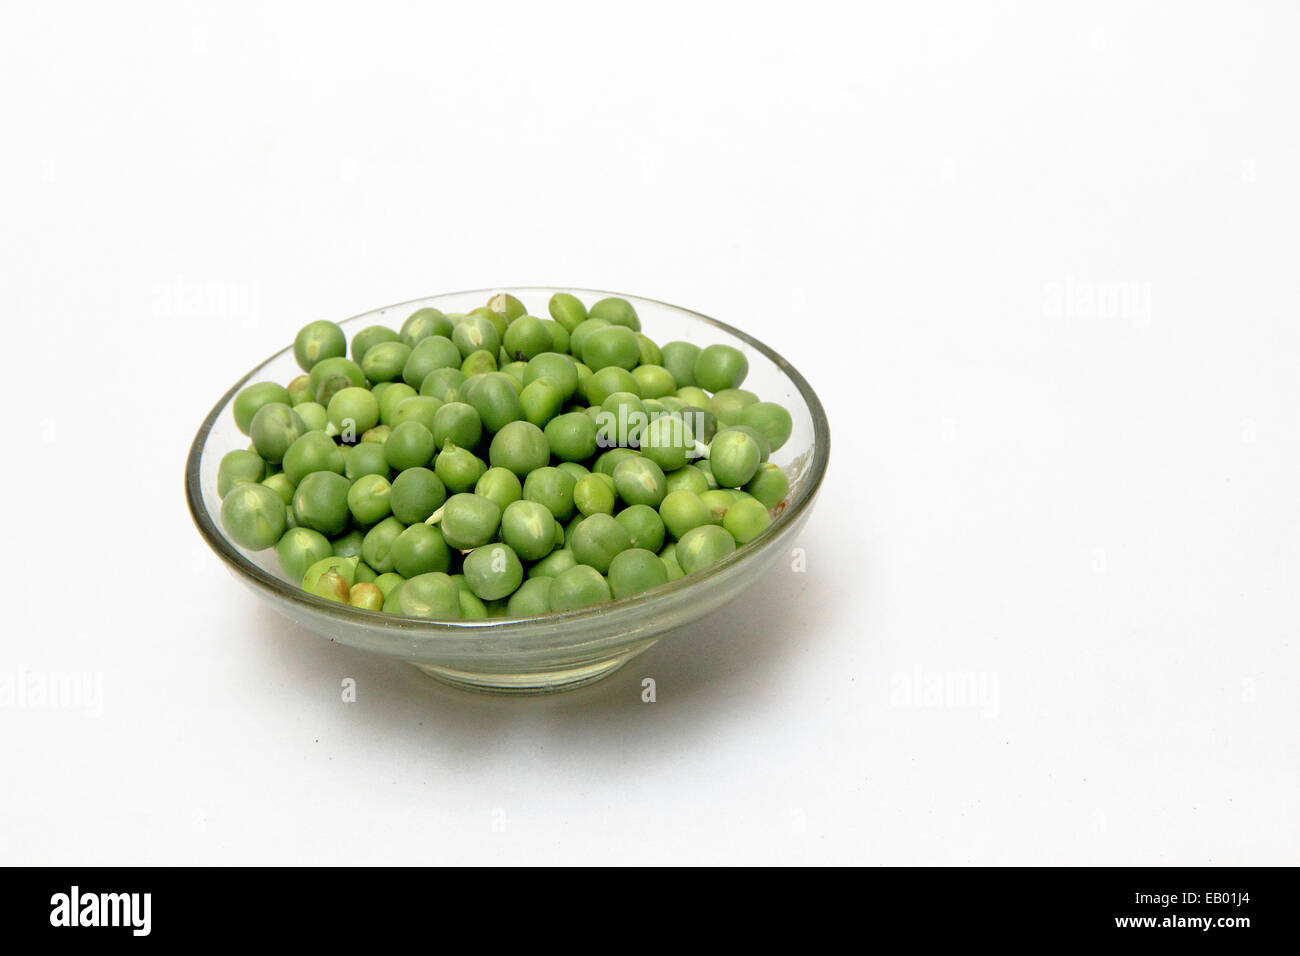 Glass dish containing fresh green peas, isolated on white Stock Photo